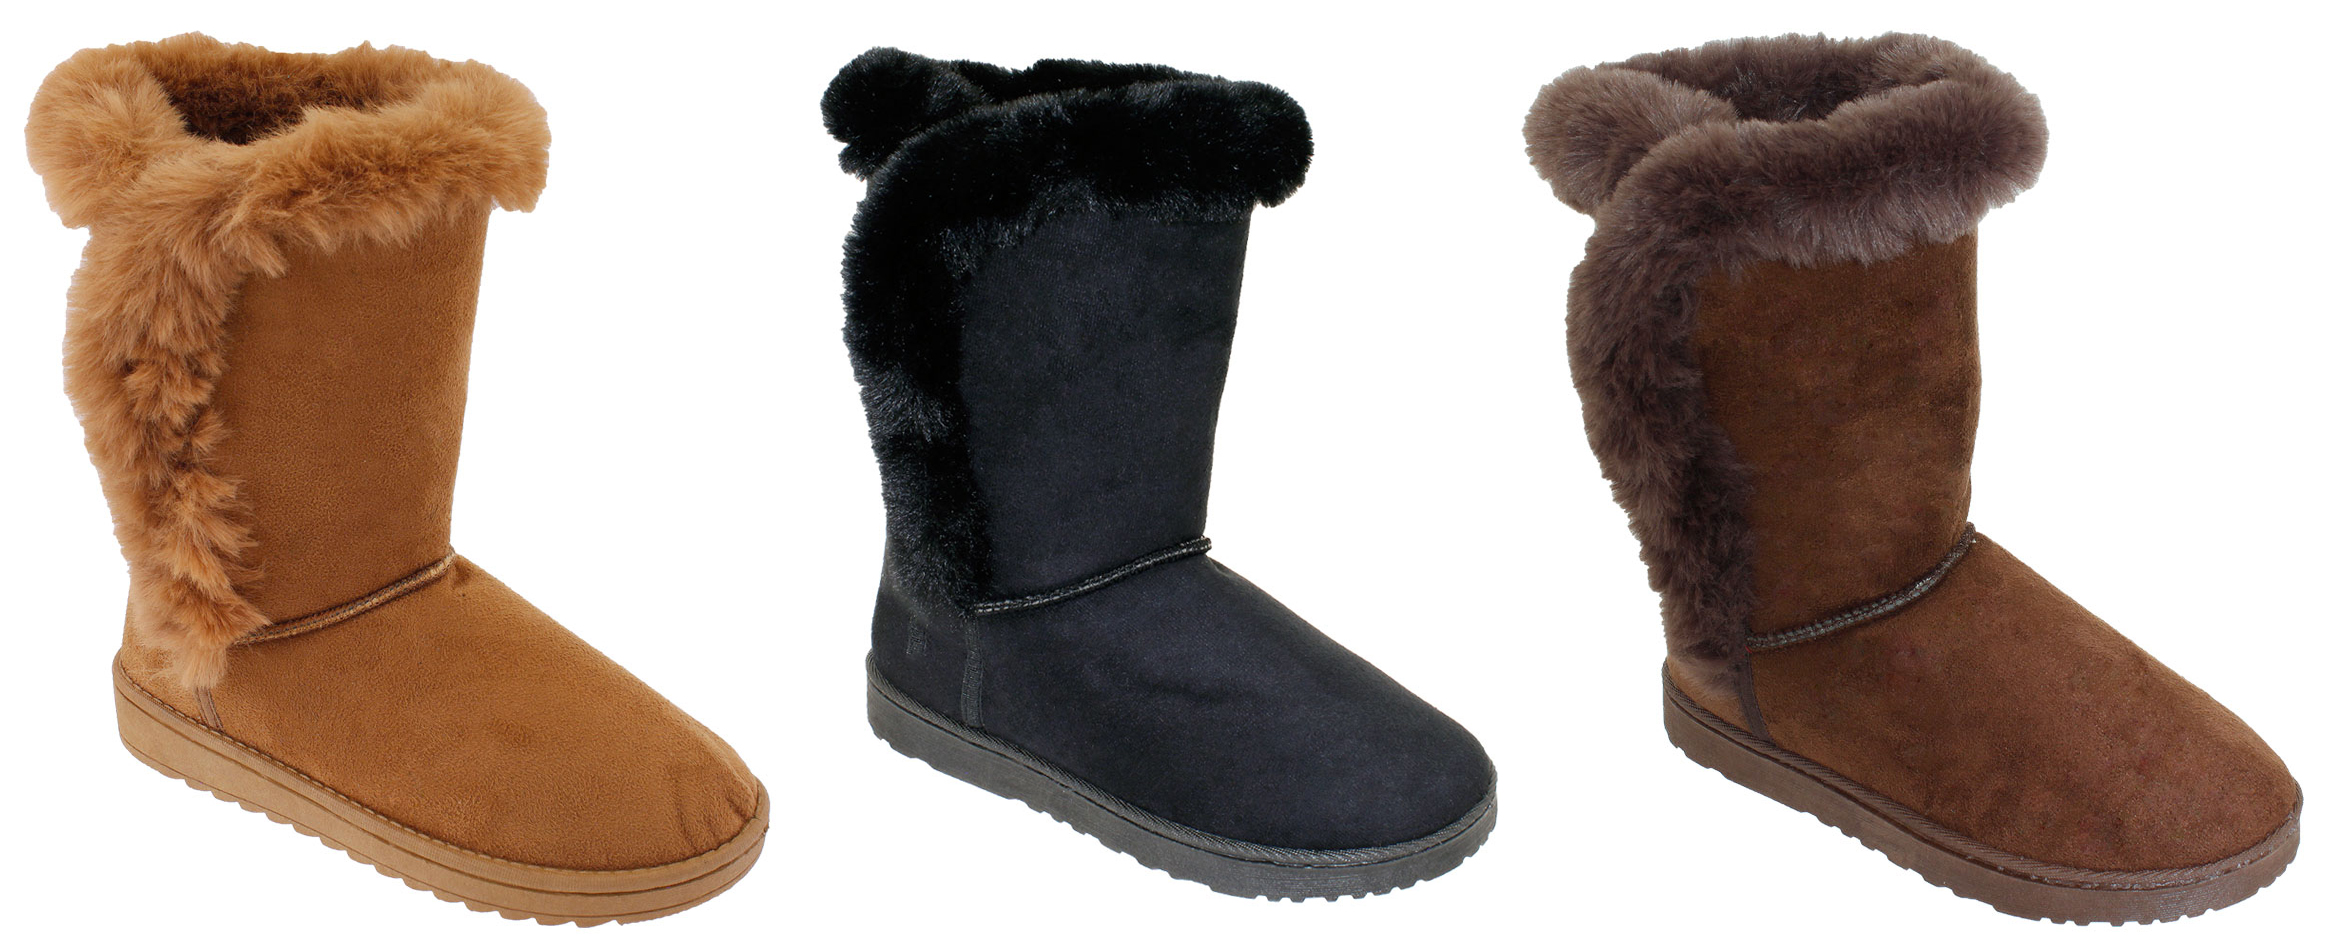 women's winter boots with fur lining